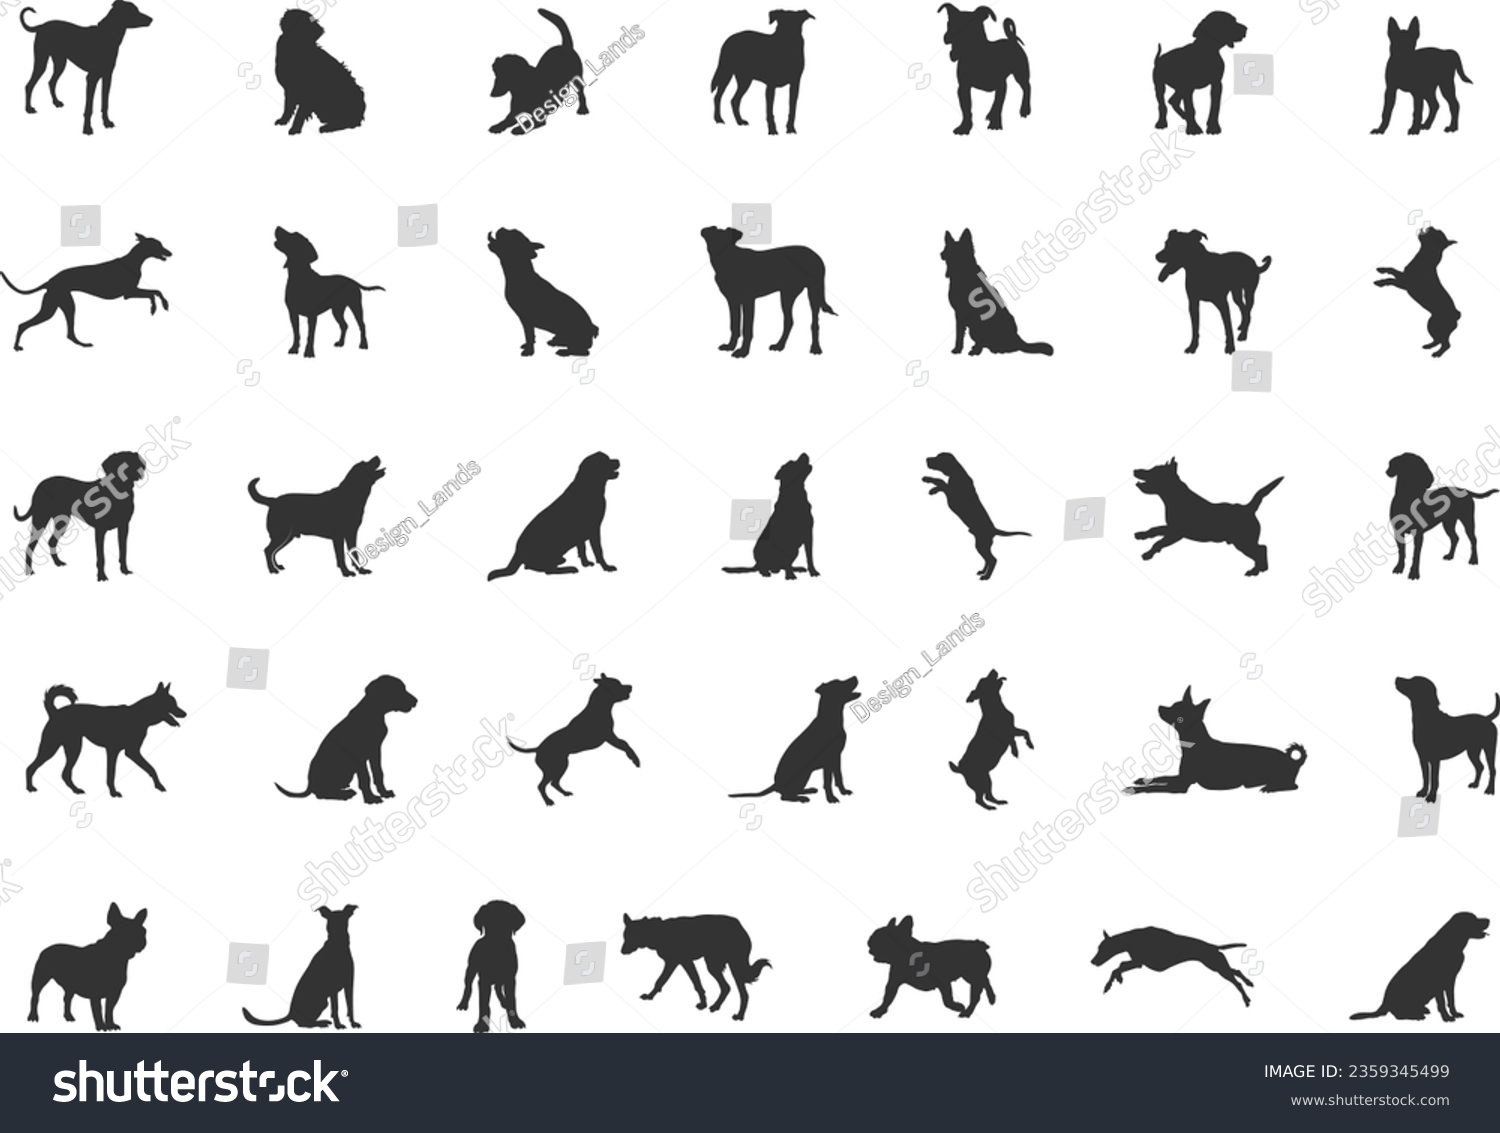 SVG of Dog silhouette, Dog silhouette collection, Dog breeds silhouettes, Dog animal SVG, Dogs vector illustration, Dogs icon svg